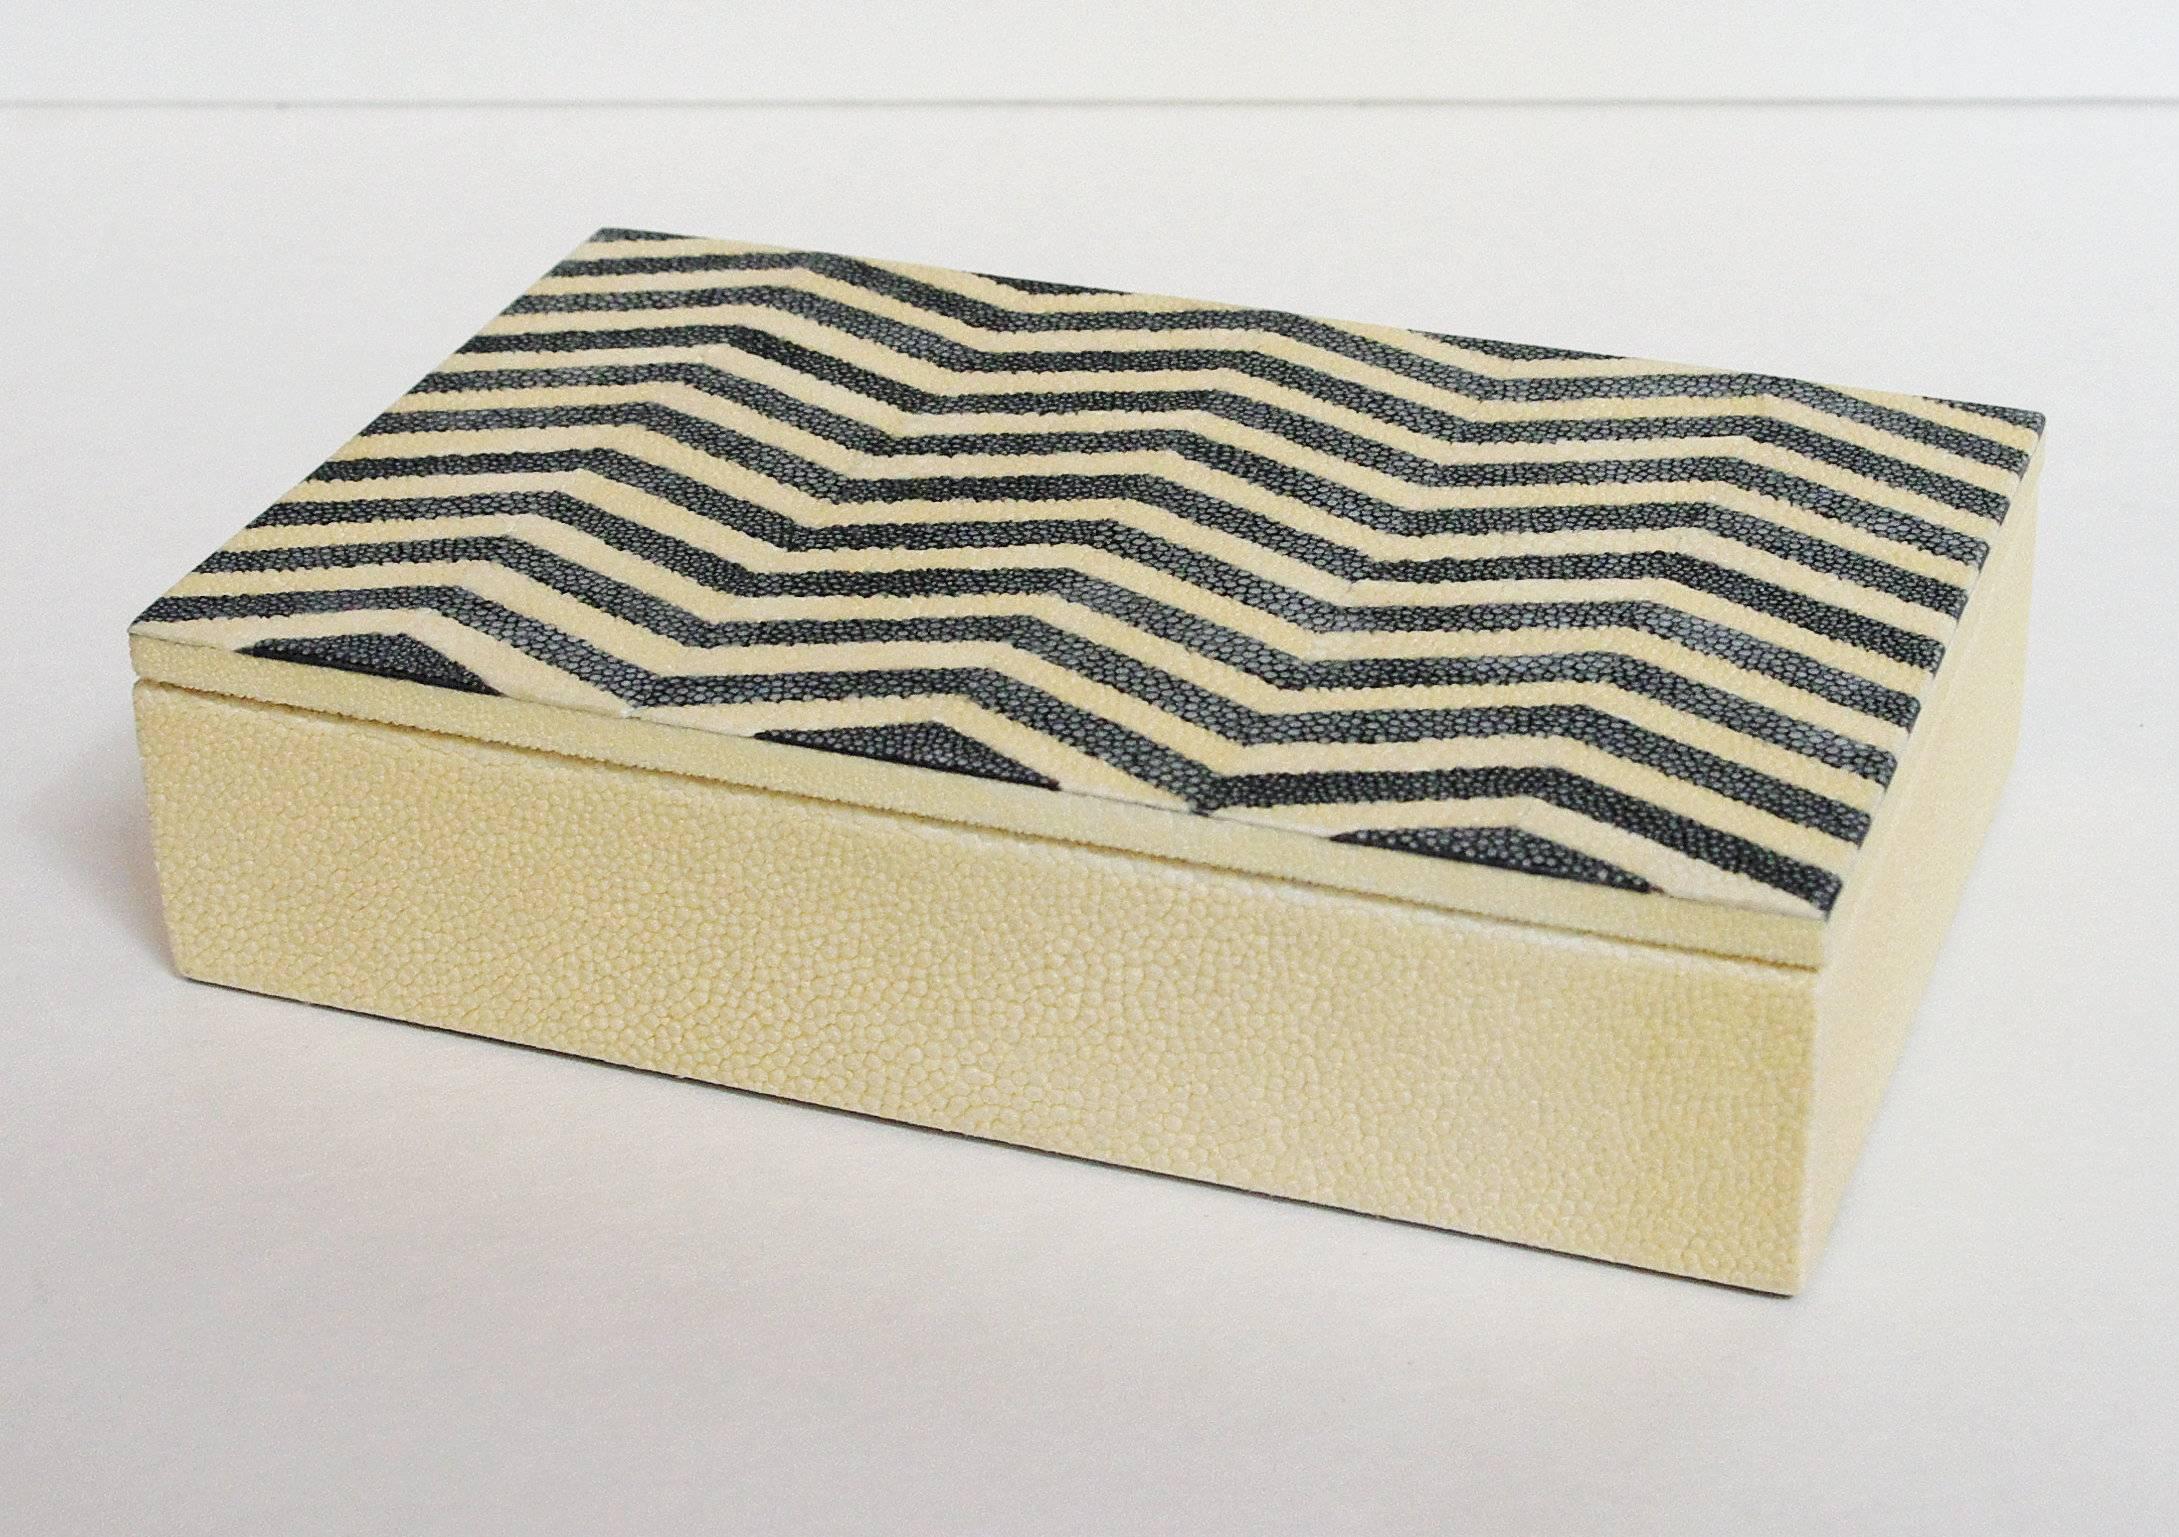 Ivory and black Shagreen box with zigzag pattern and gray suede interior
Depth: 5 inches / Width: 8 inches / Height: 2 inches
1 in stock in Palm Springs currently ON SALE for $699!!!
Order Reference #: MR19

This piece makes for great and unique